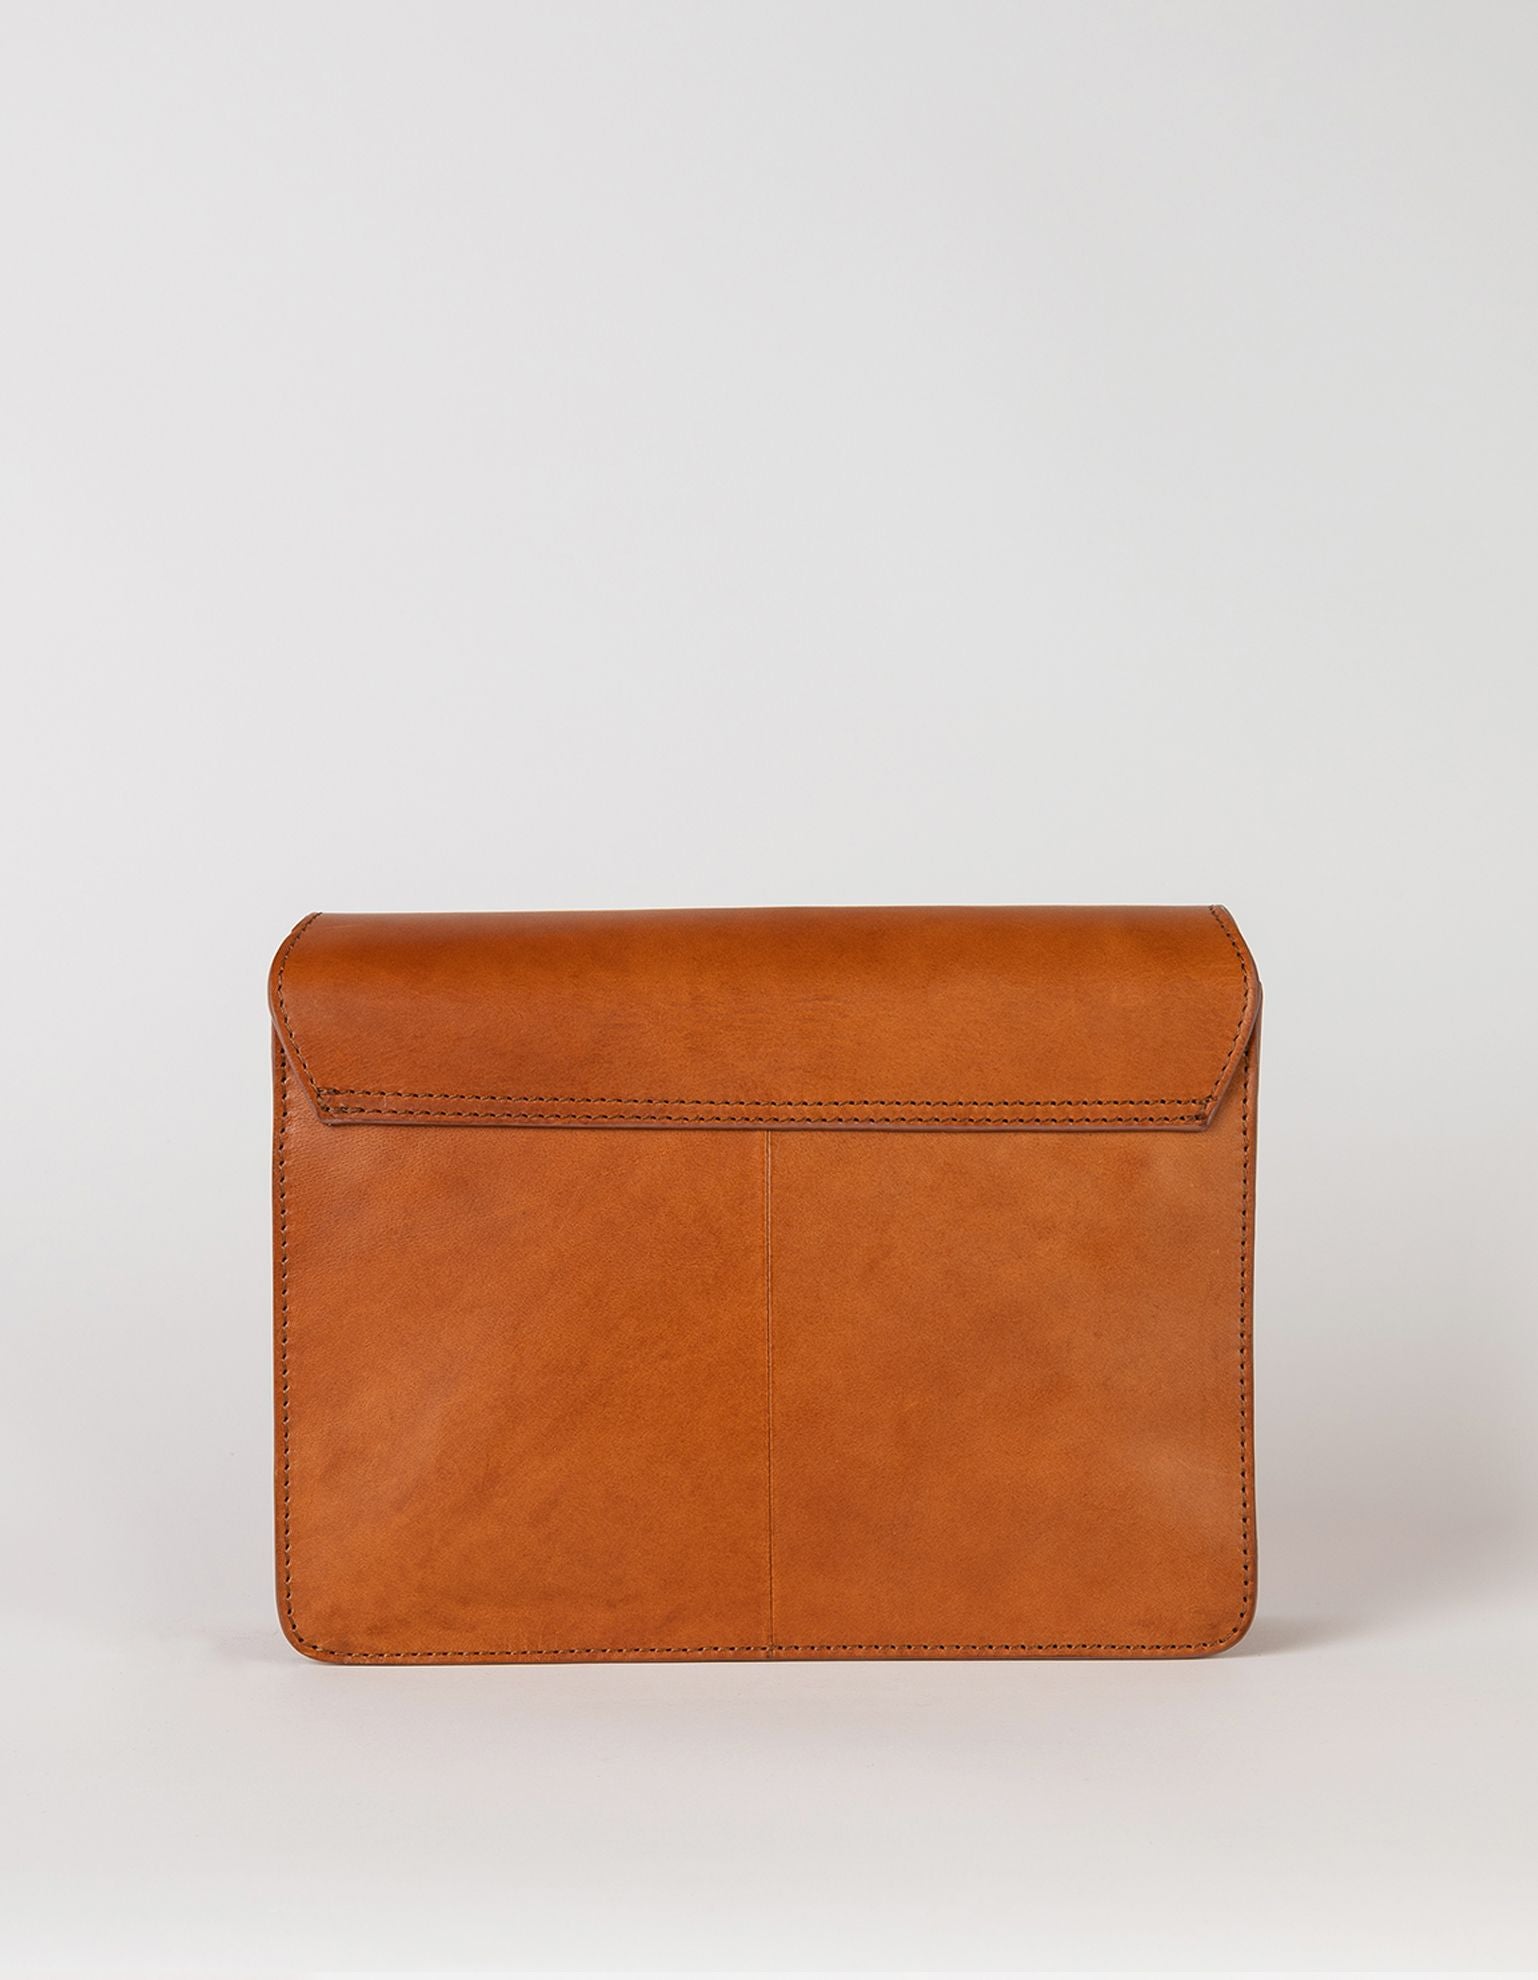 Audrey crossbody bag in cognac classic leather. Back product image.